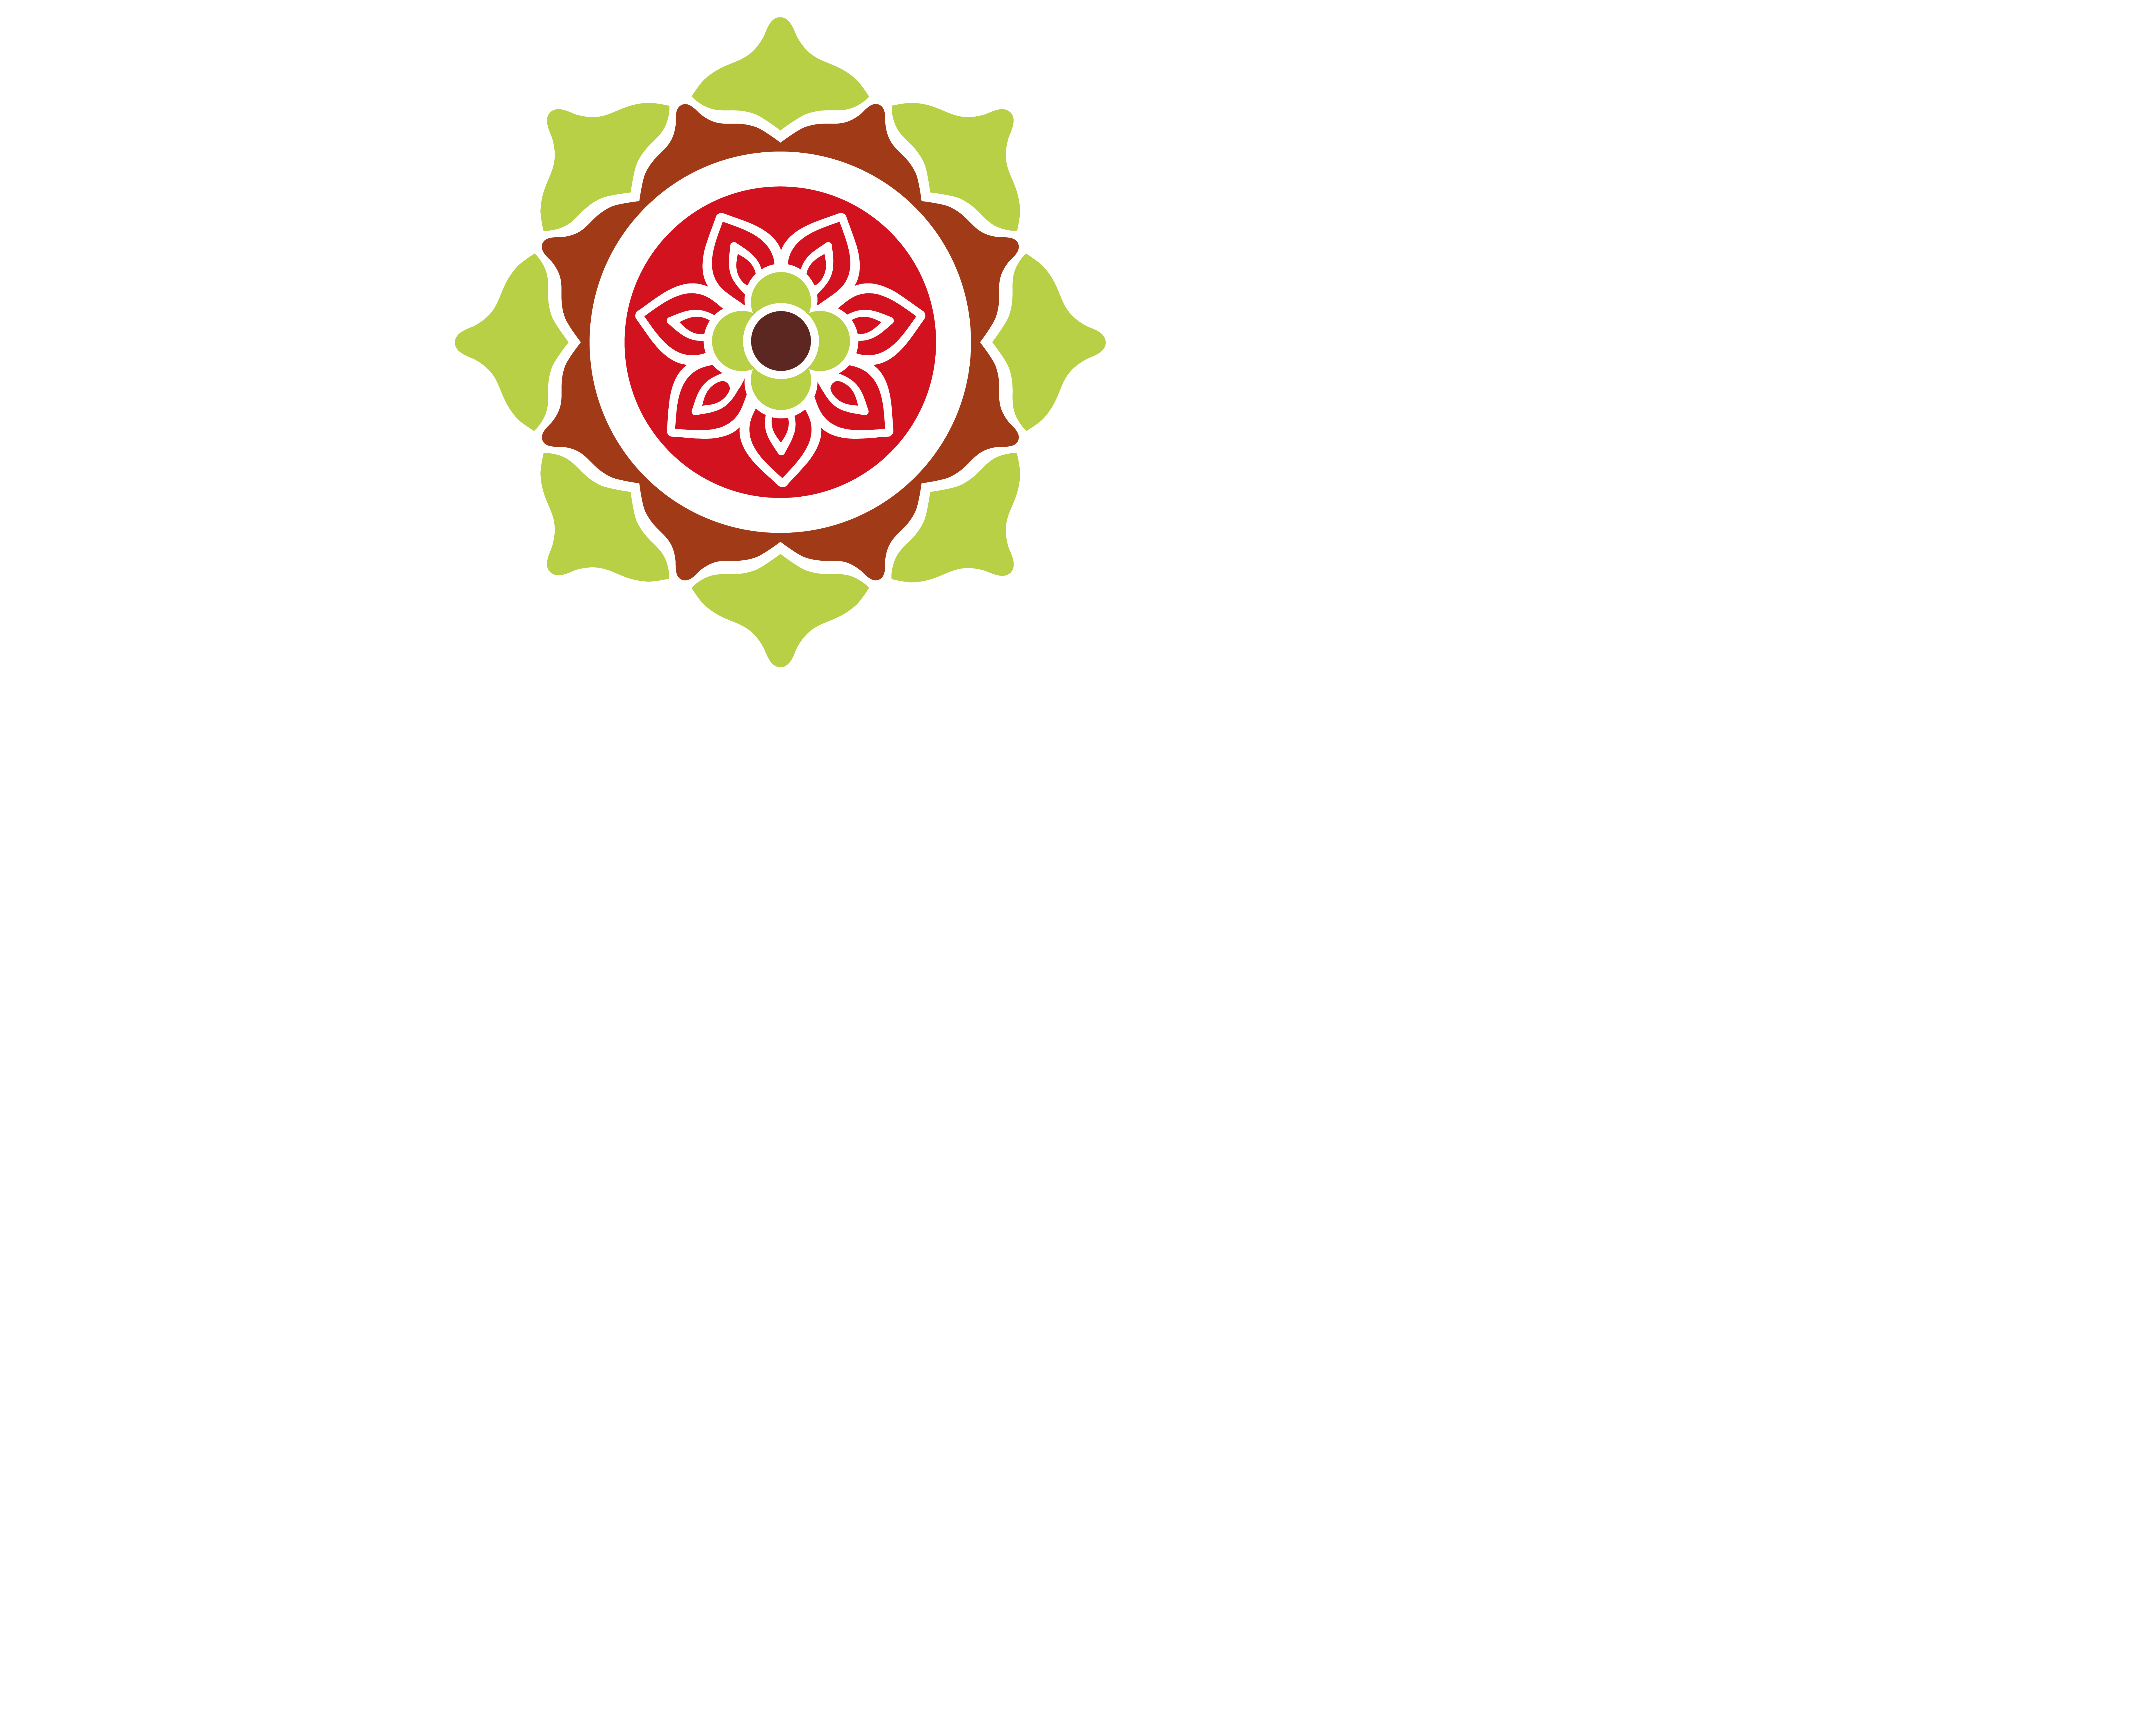 A black sign with white text and a flower design. The image is related to CLUB and Sardinia.